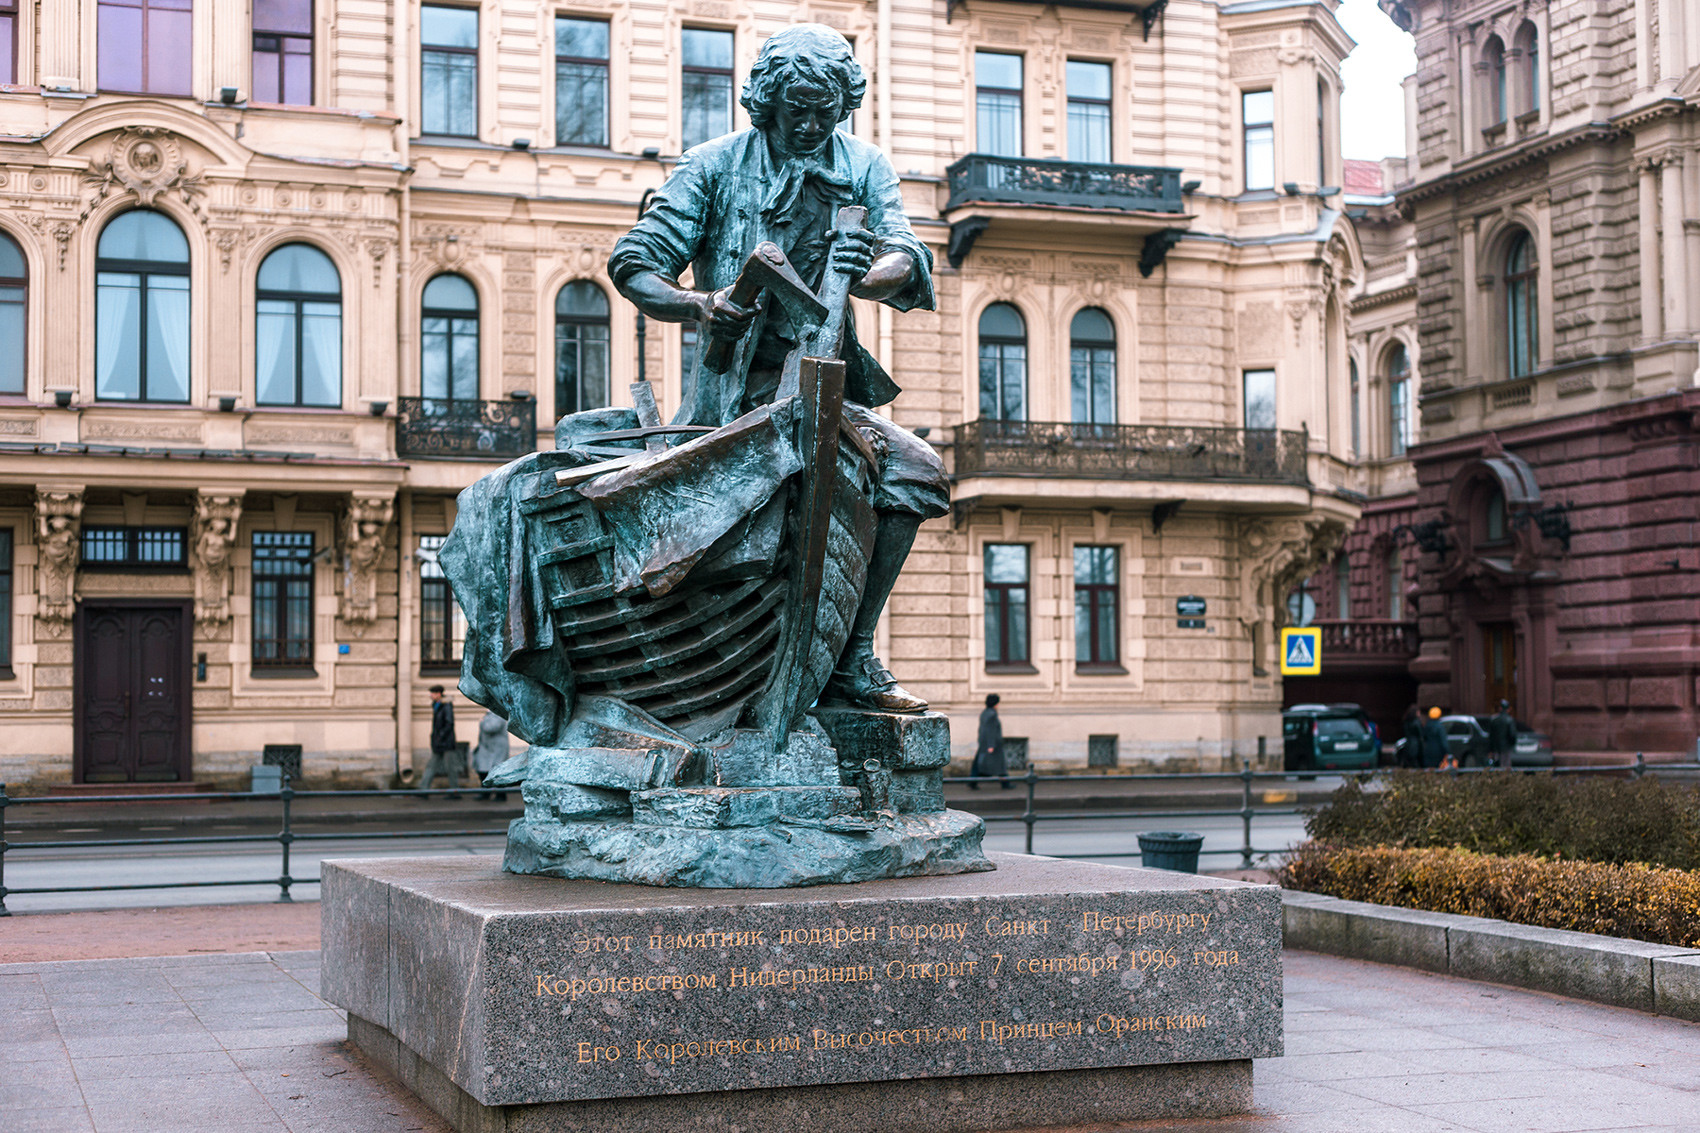 The monument to Peter the Great the shipbuilder, St. Petersburg